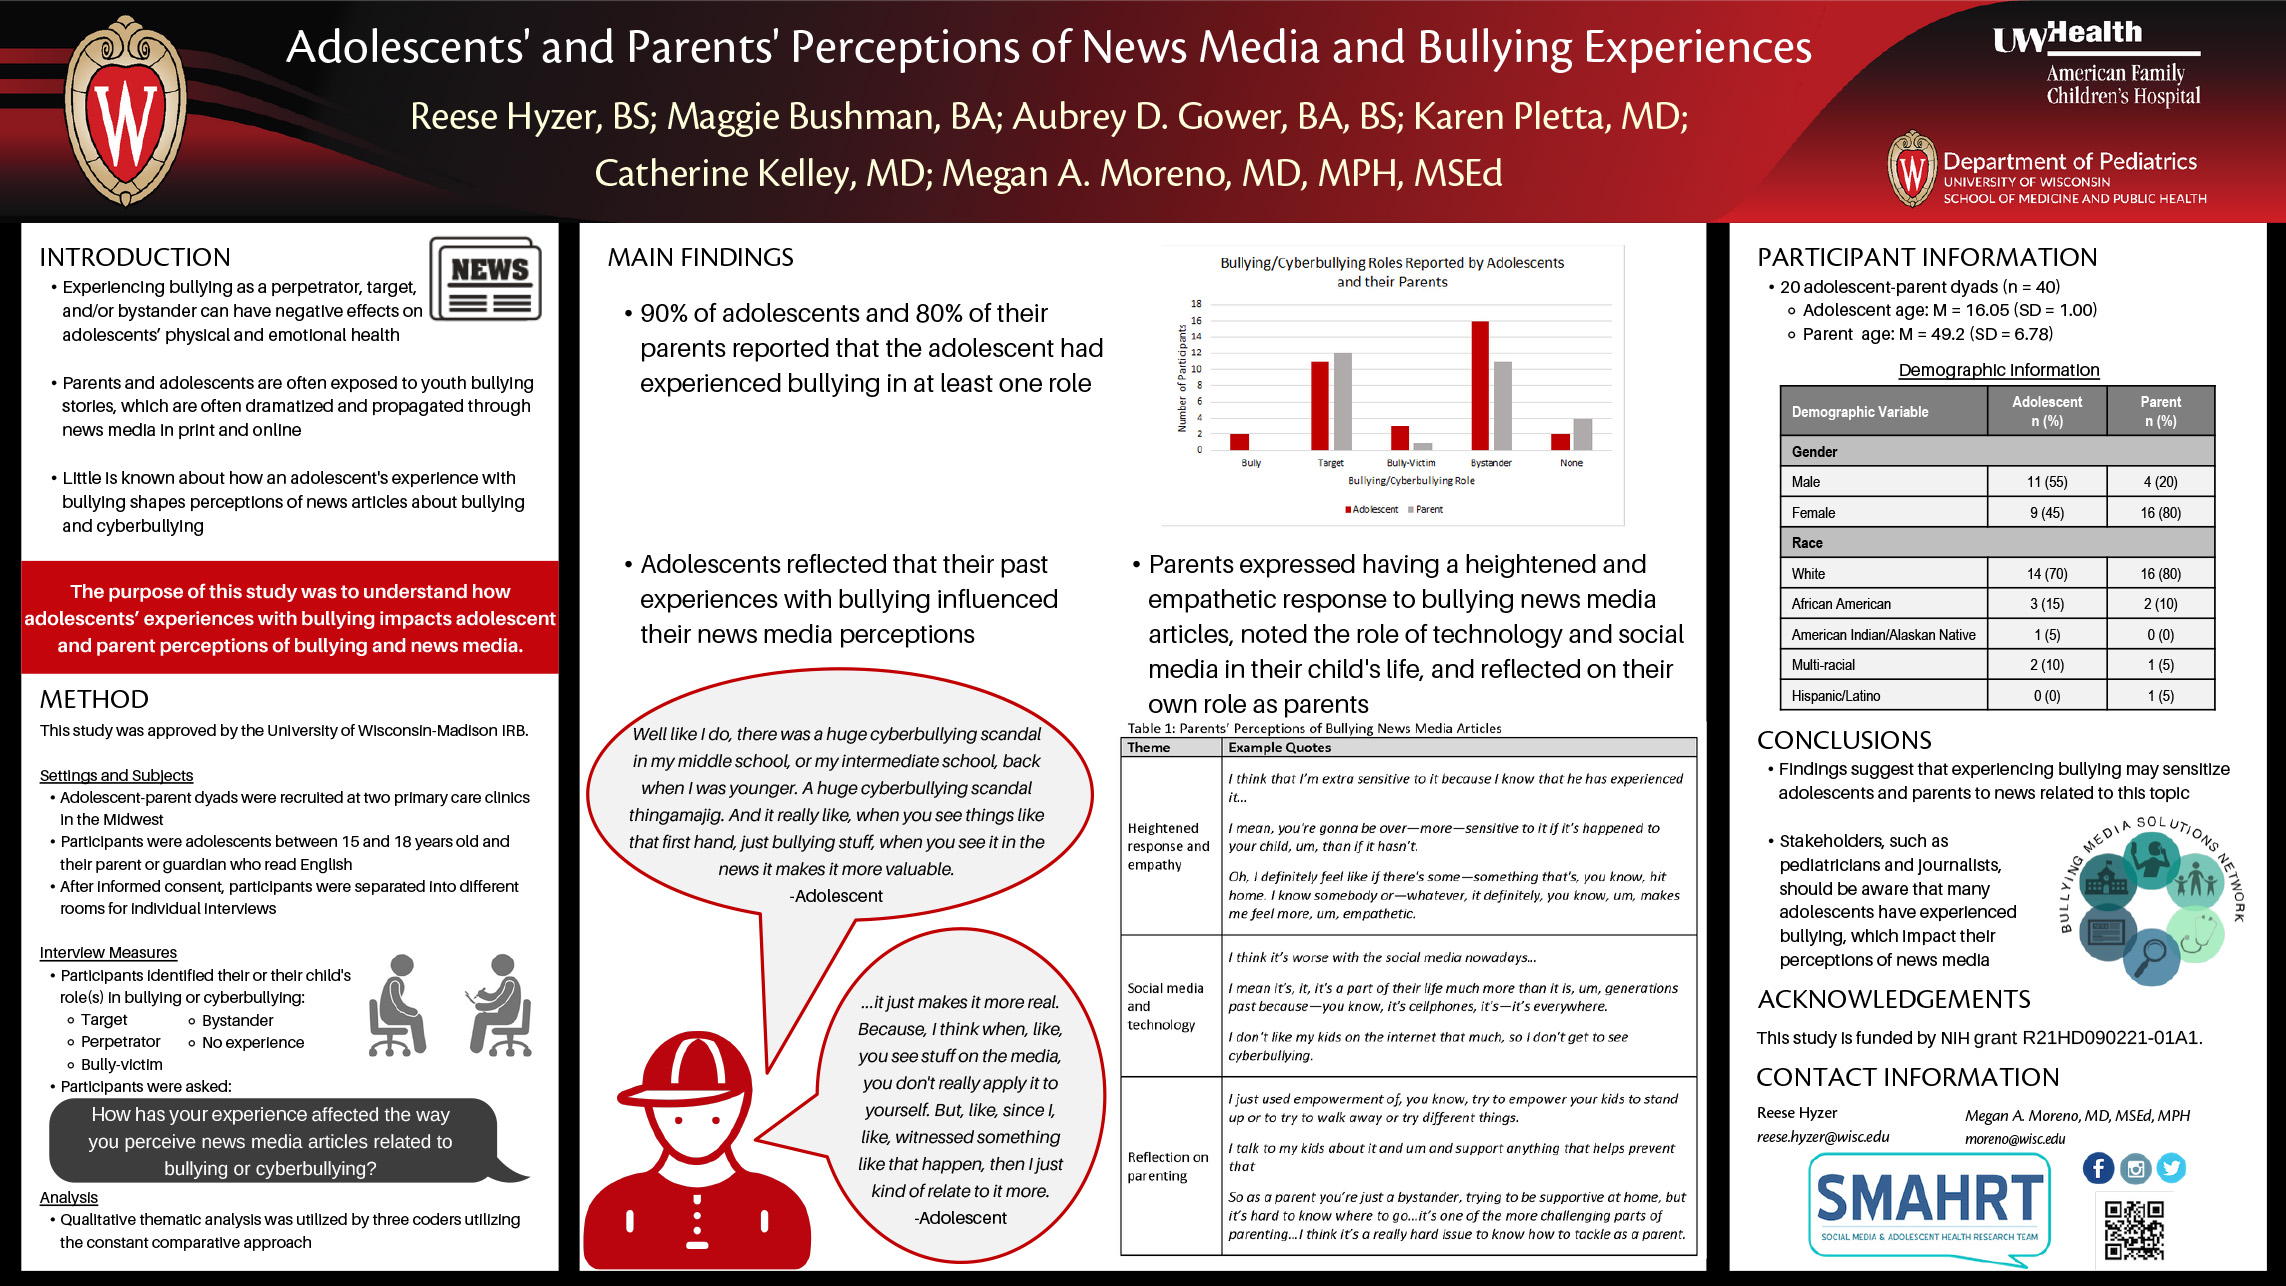 Adolescents' and Parents' Perceptions of News Media and Bullying Experiences poster image